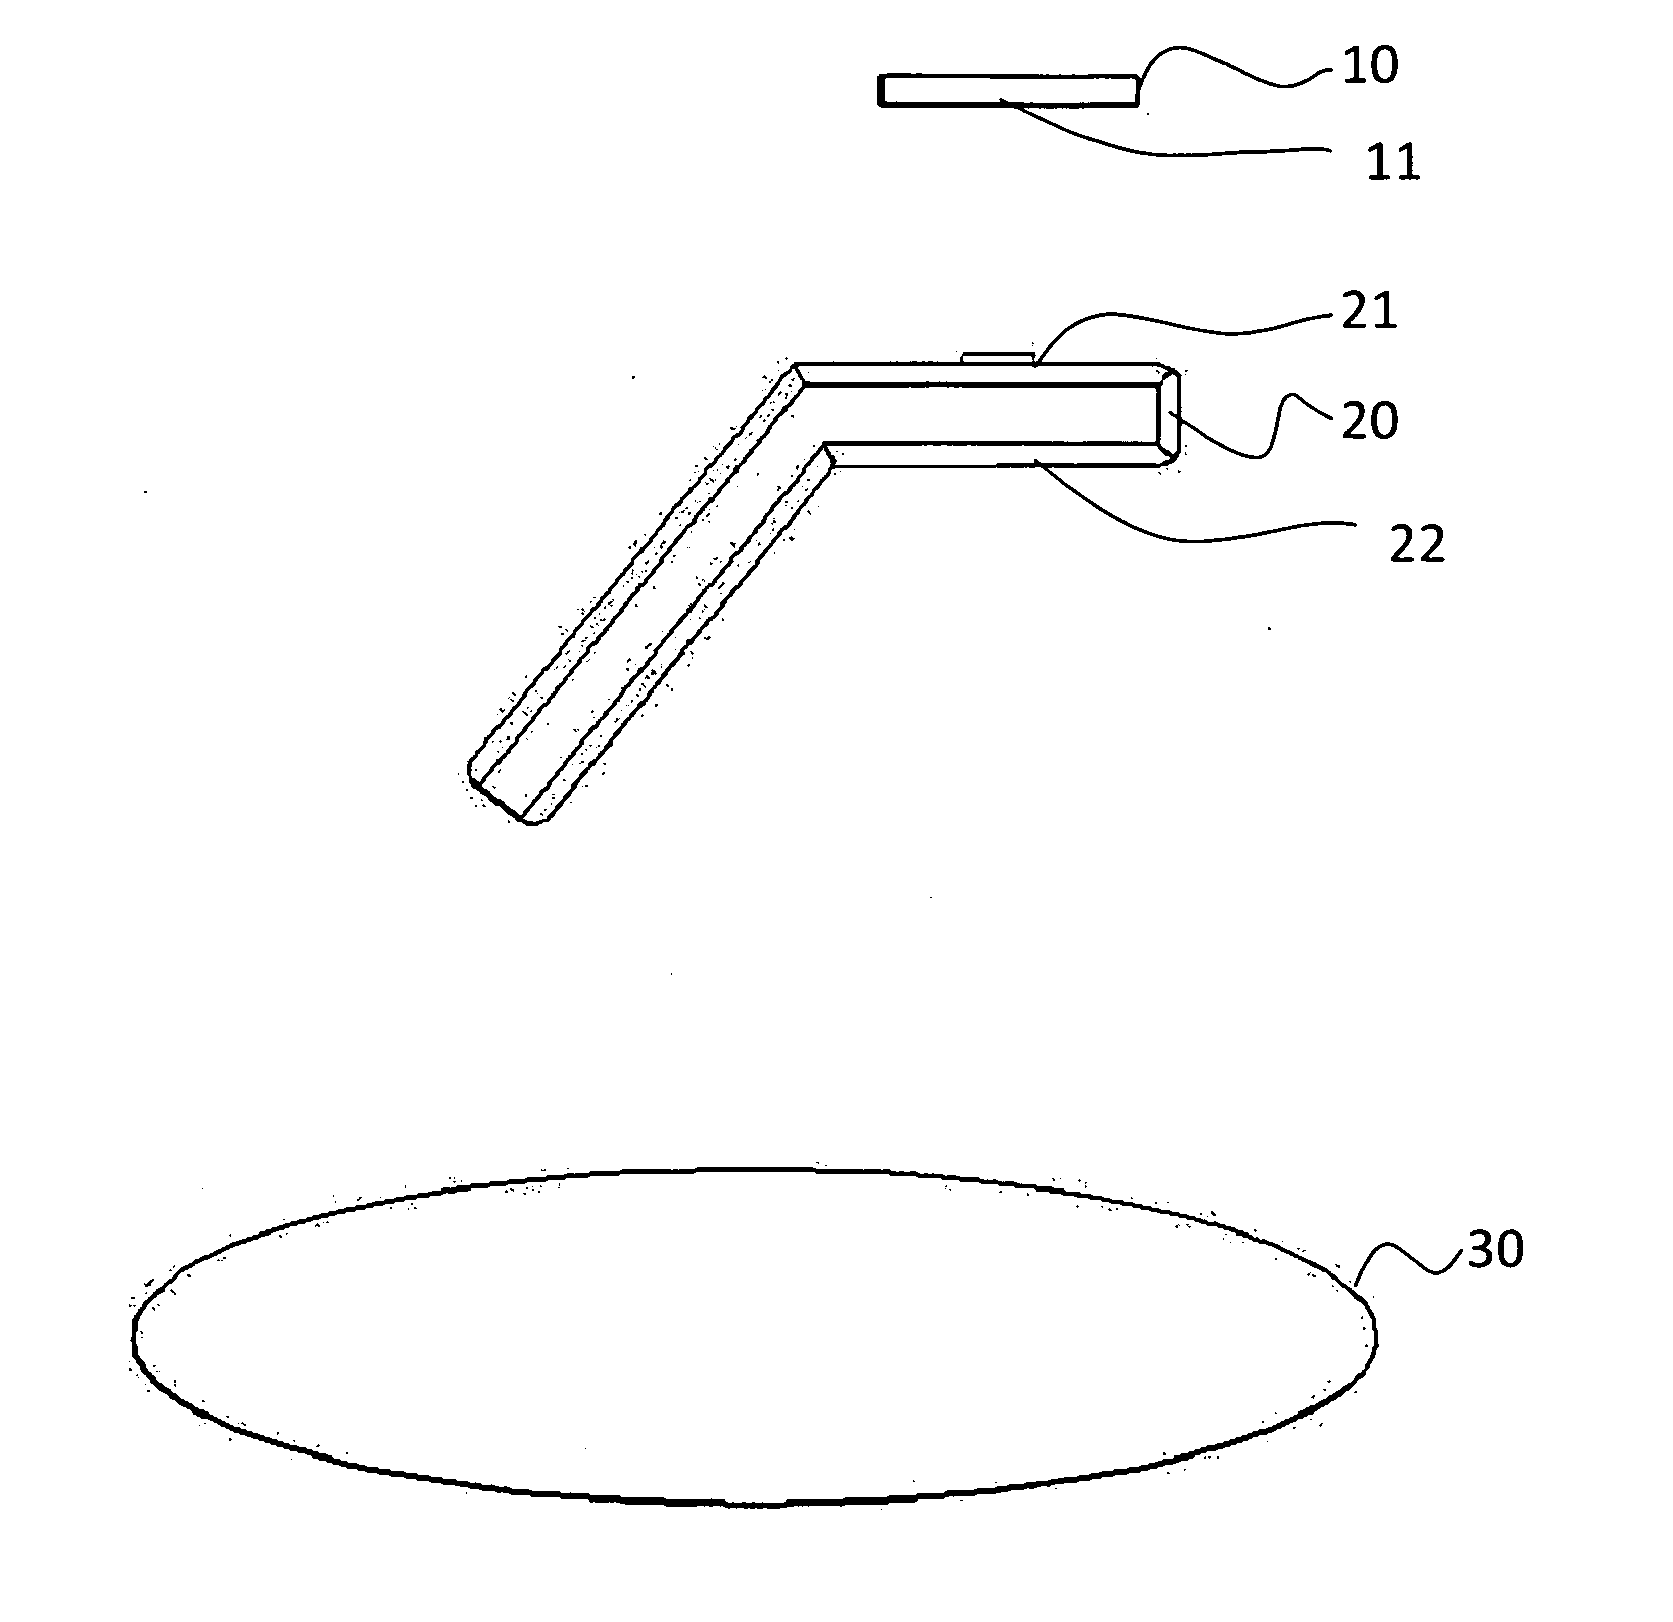 Method and apparatus for testing water quality using a cell-phone application, mirror and plastic bag